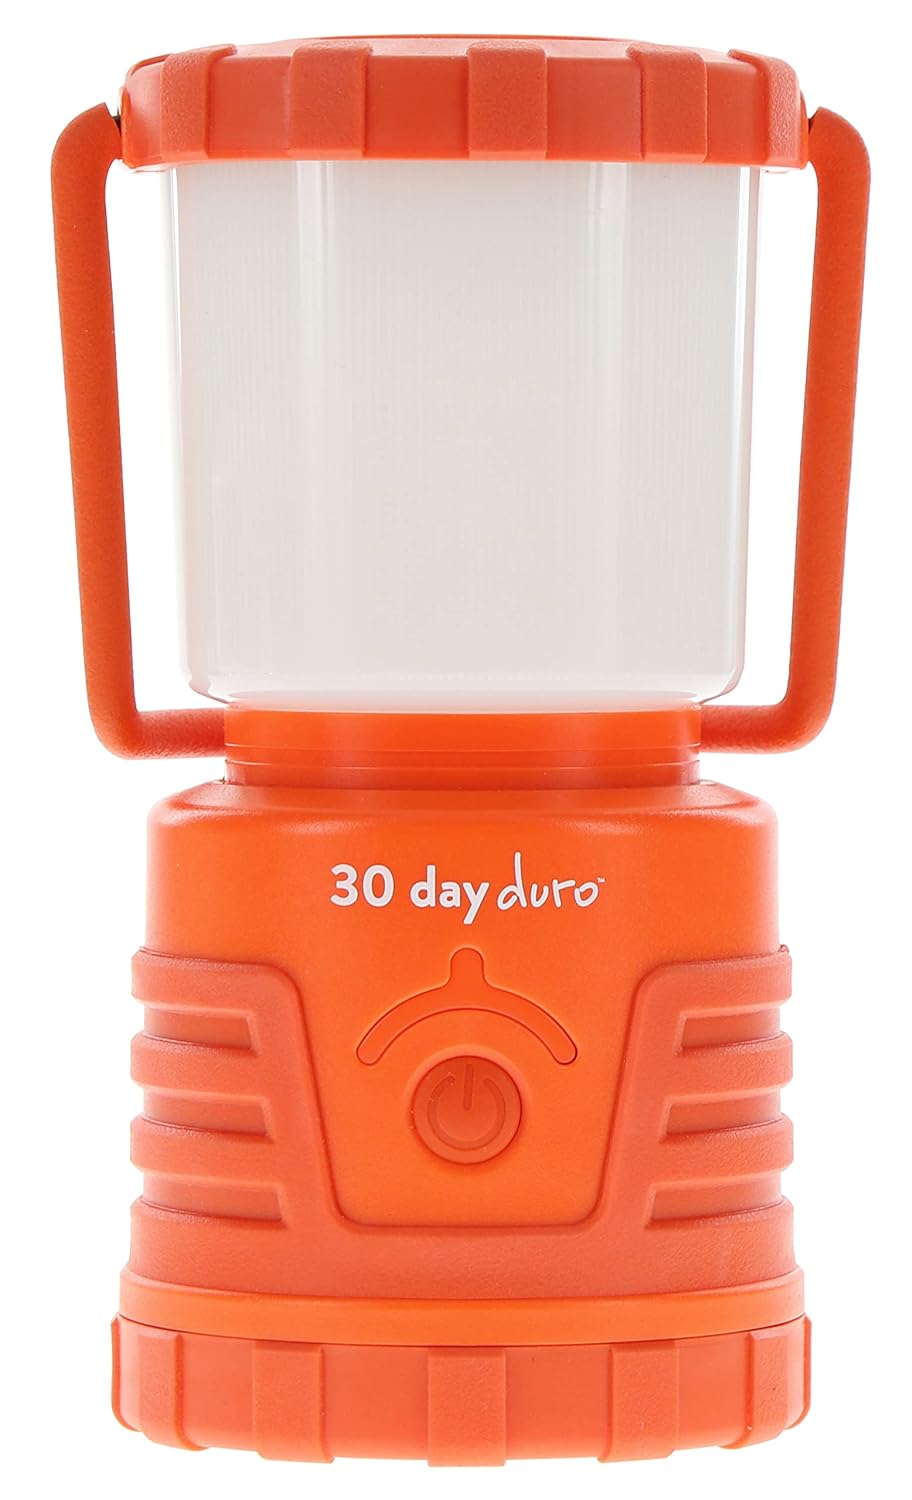 UST 30-Day Duro 1000 Lumen LED Lantern with Lifetime LED Bulbs, Glow in The Dark Power Button and Hook for Camping, Hiking, Emergency and Outdoor Survival